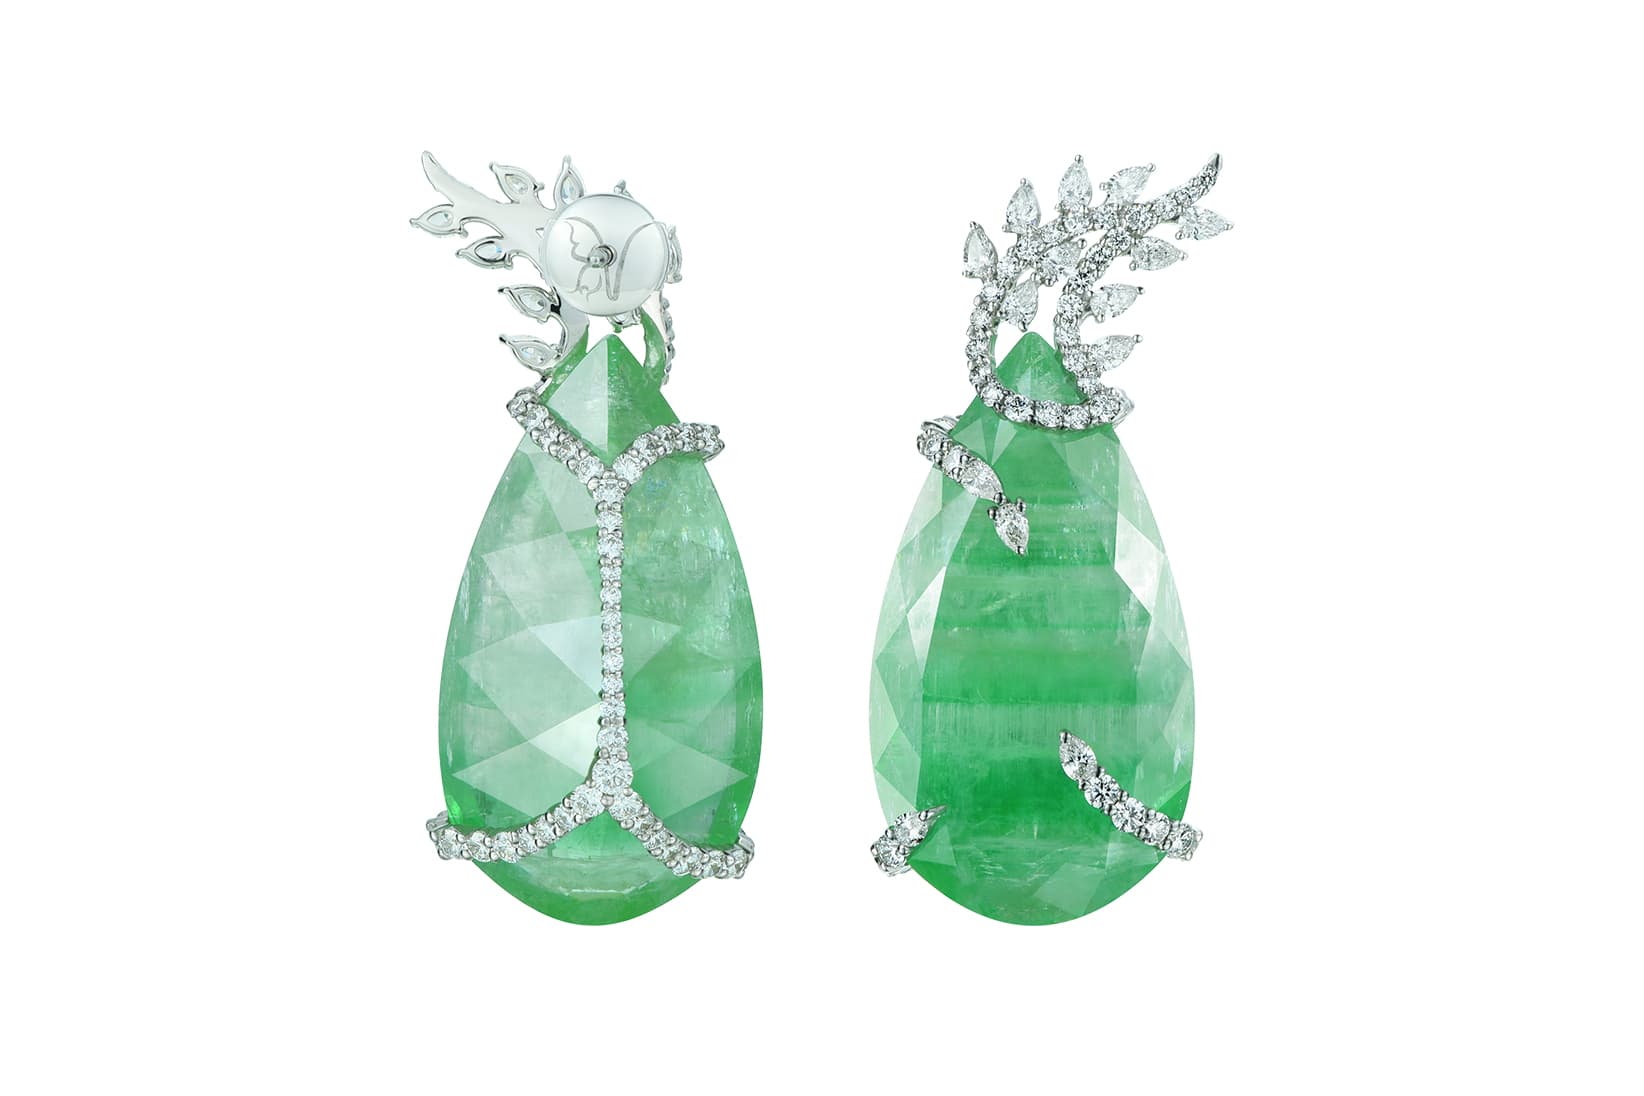 Valentyna Alb Emeralds “Exclusive” earrings, set with two rare and unusual pear shape emeralds that originate from Russia’s Ural Mountains  